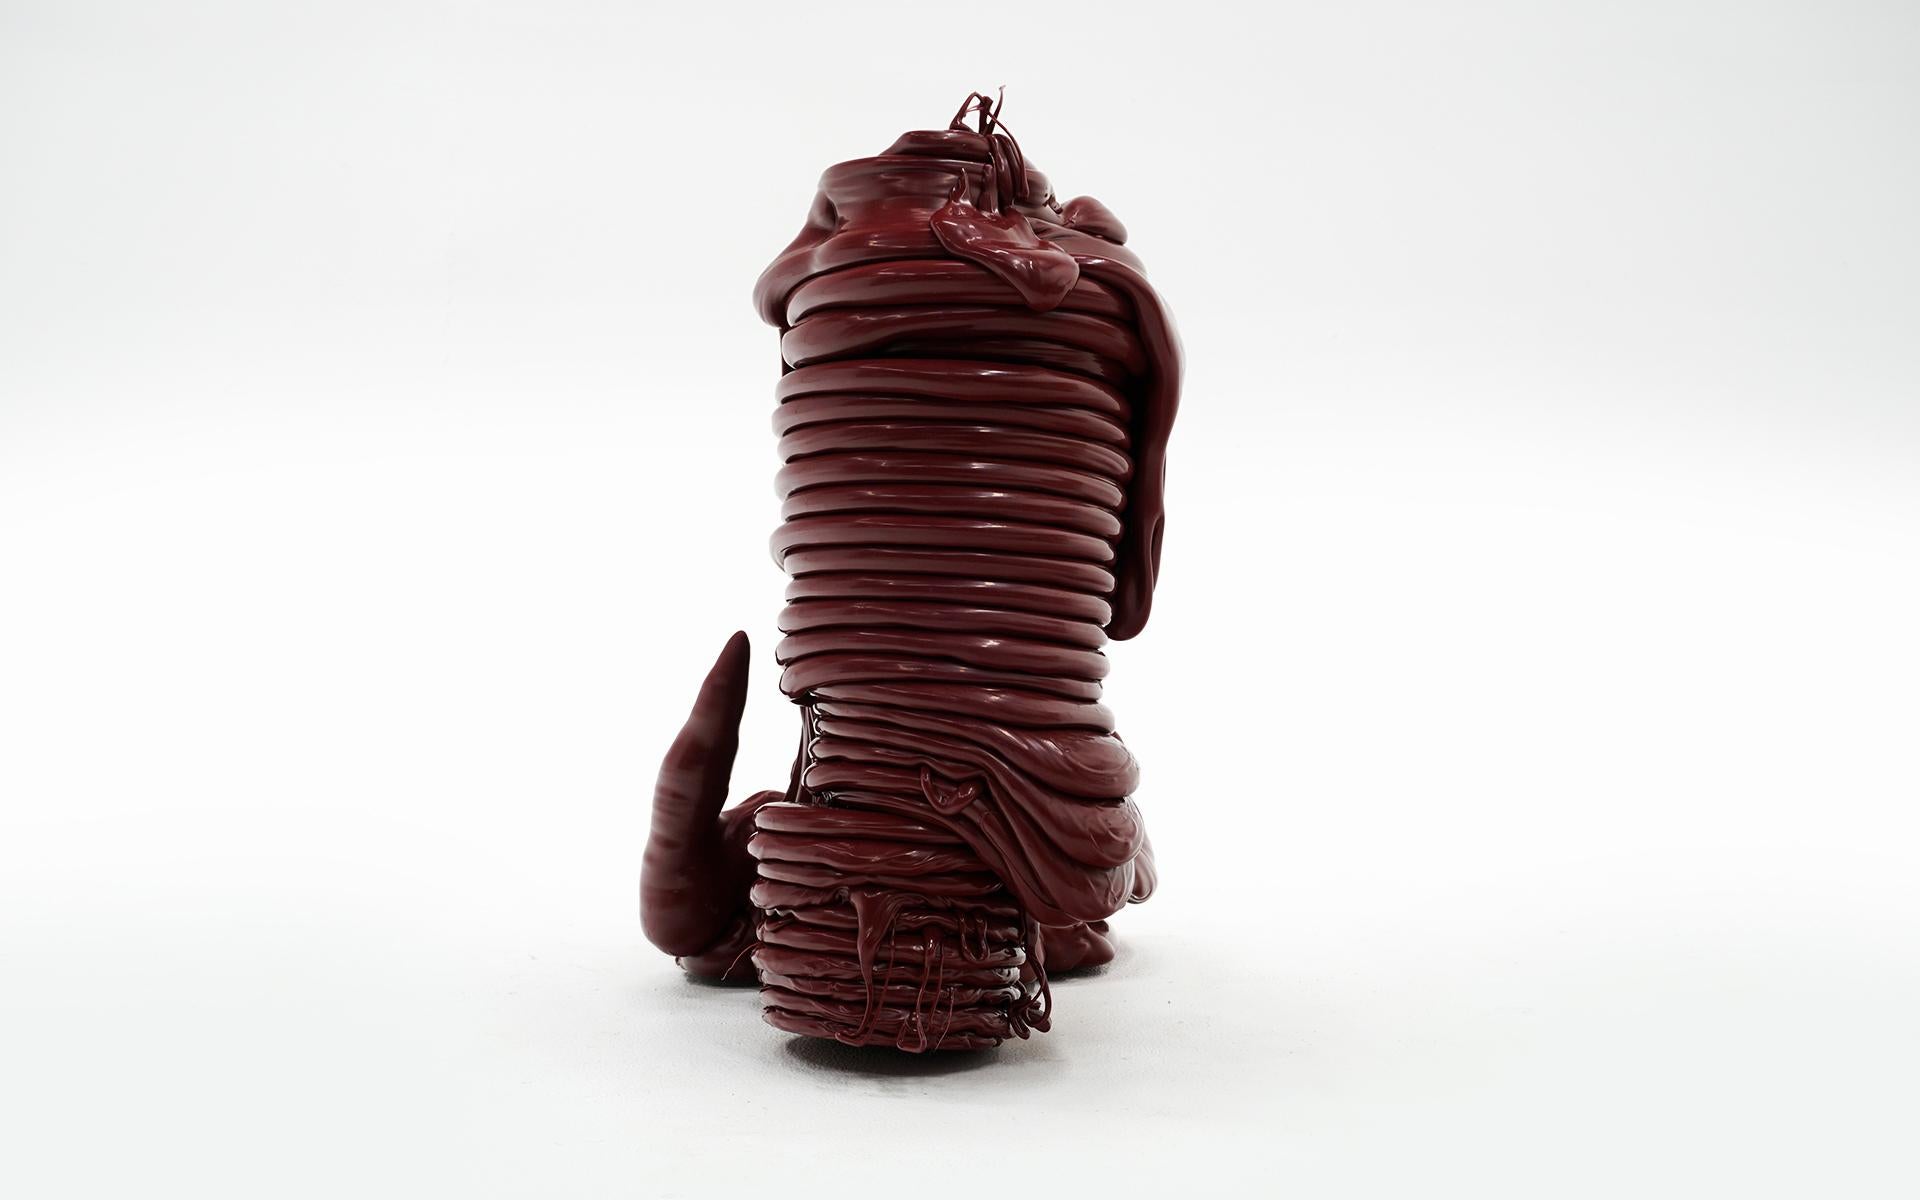 American Roxy Paine Scumak, 2011, Maroon / Burgundy Color, Mint Condition, Signed For Sale